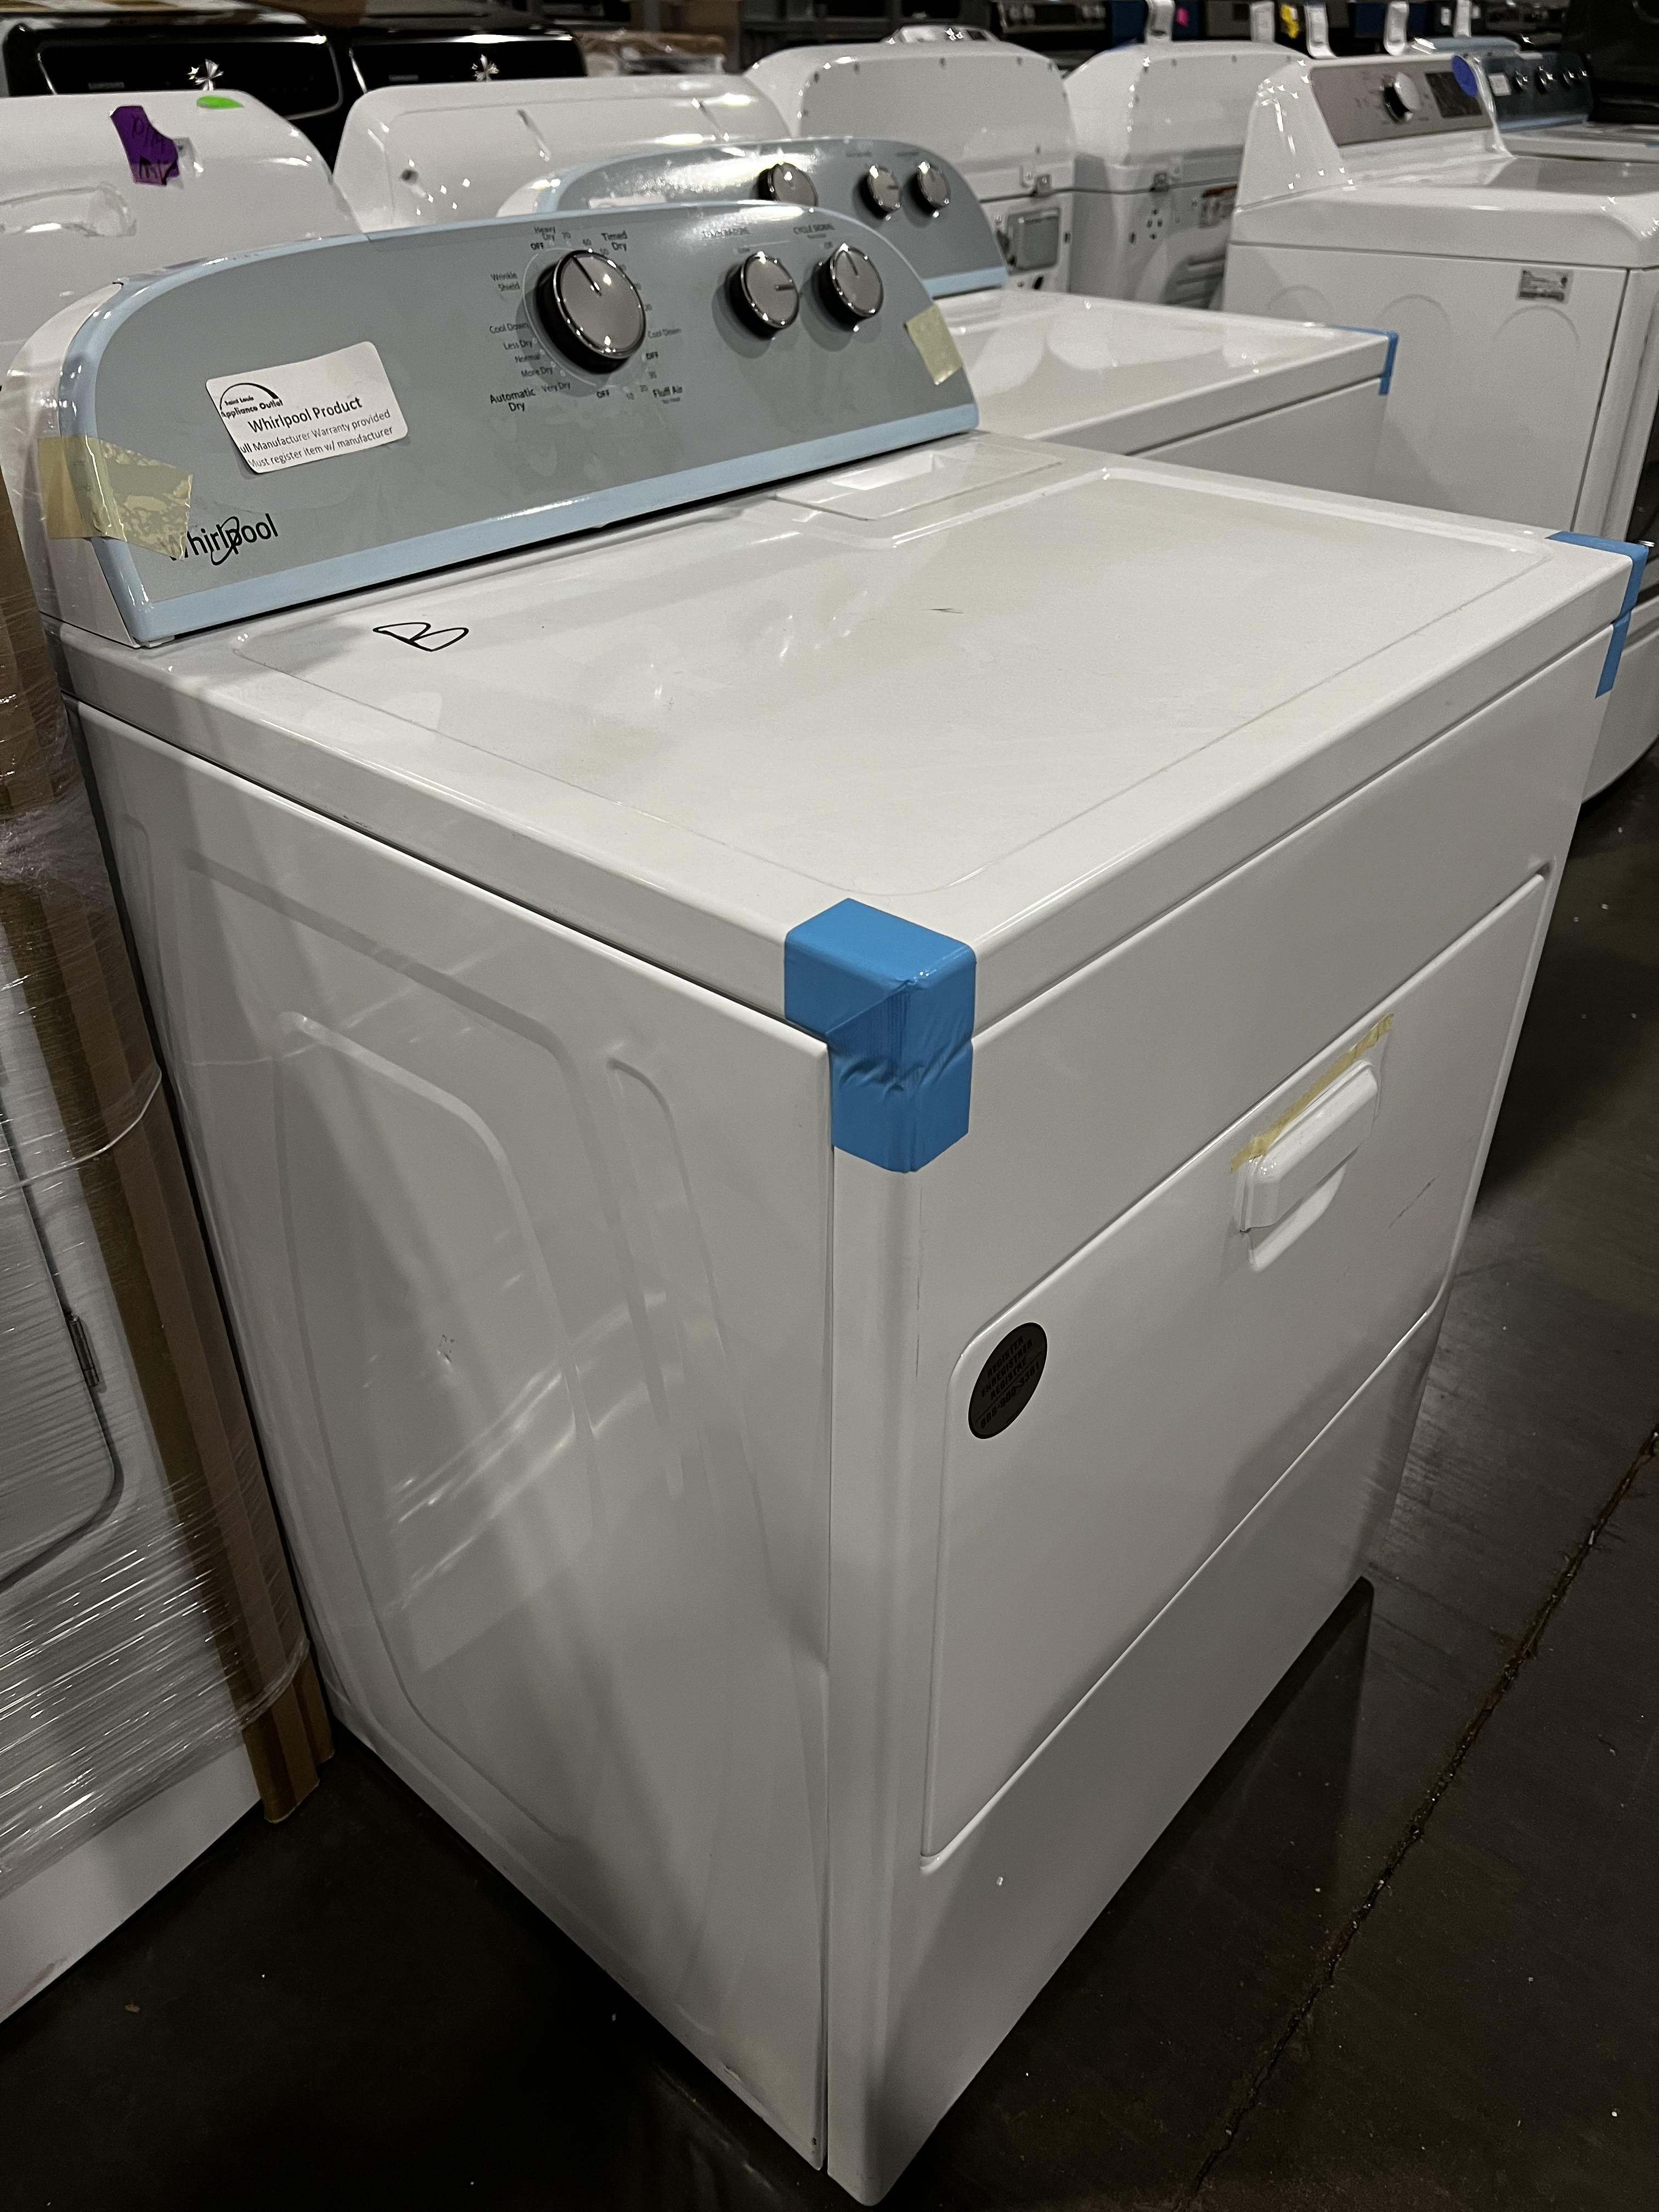 Whirlpool 7.0 cu. ft. Top Load Electric Dryer with AutoDry? Drying System (WED4950HW)